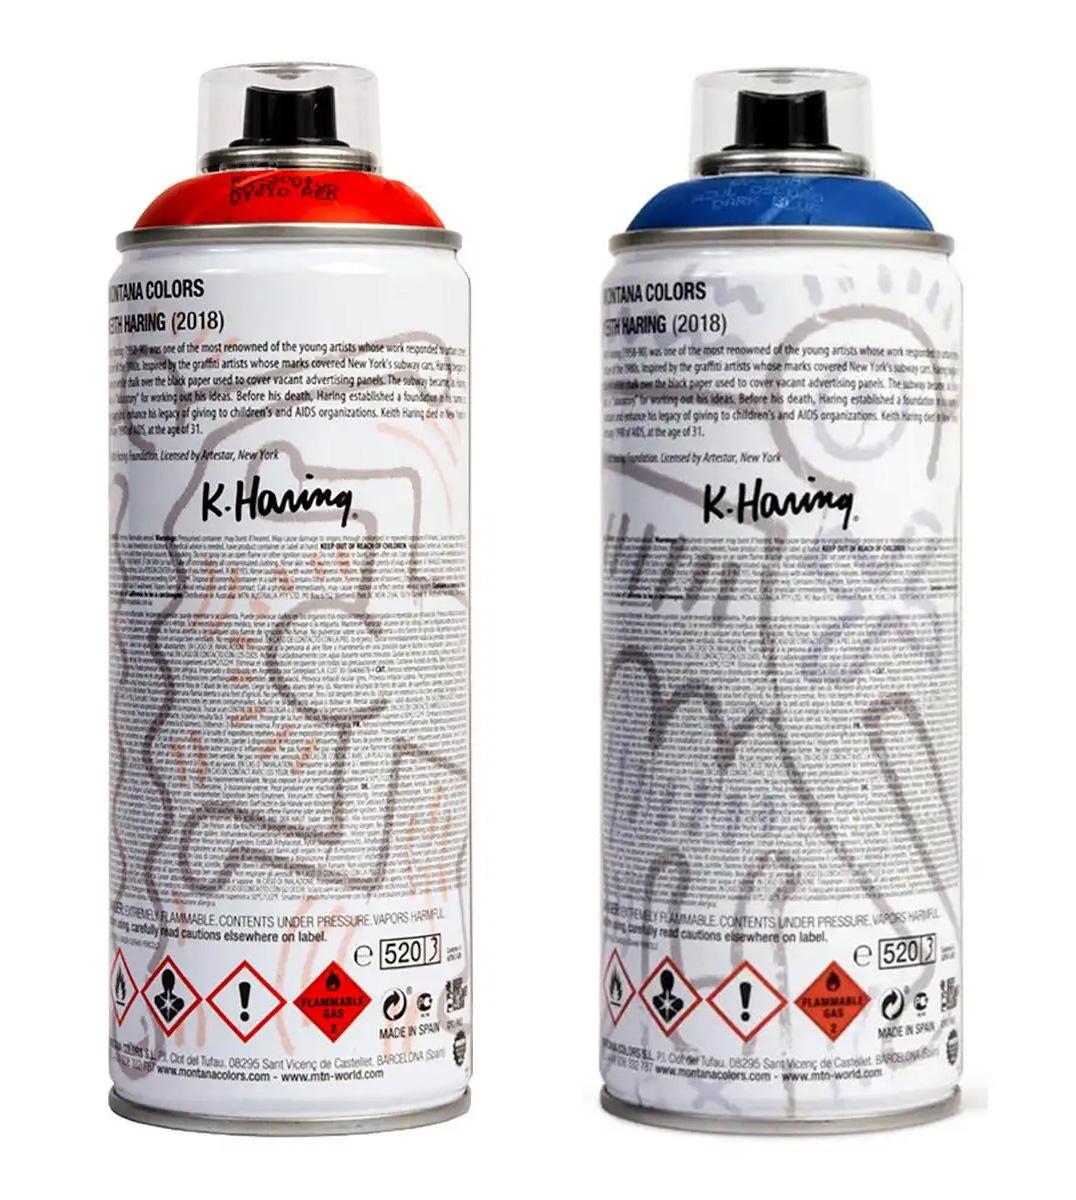 Limited edition Keith Haring spray paint can (set of 2) - Street Art Mixed Media Art by (after) Keith Haring